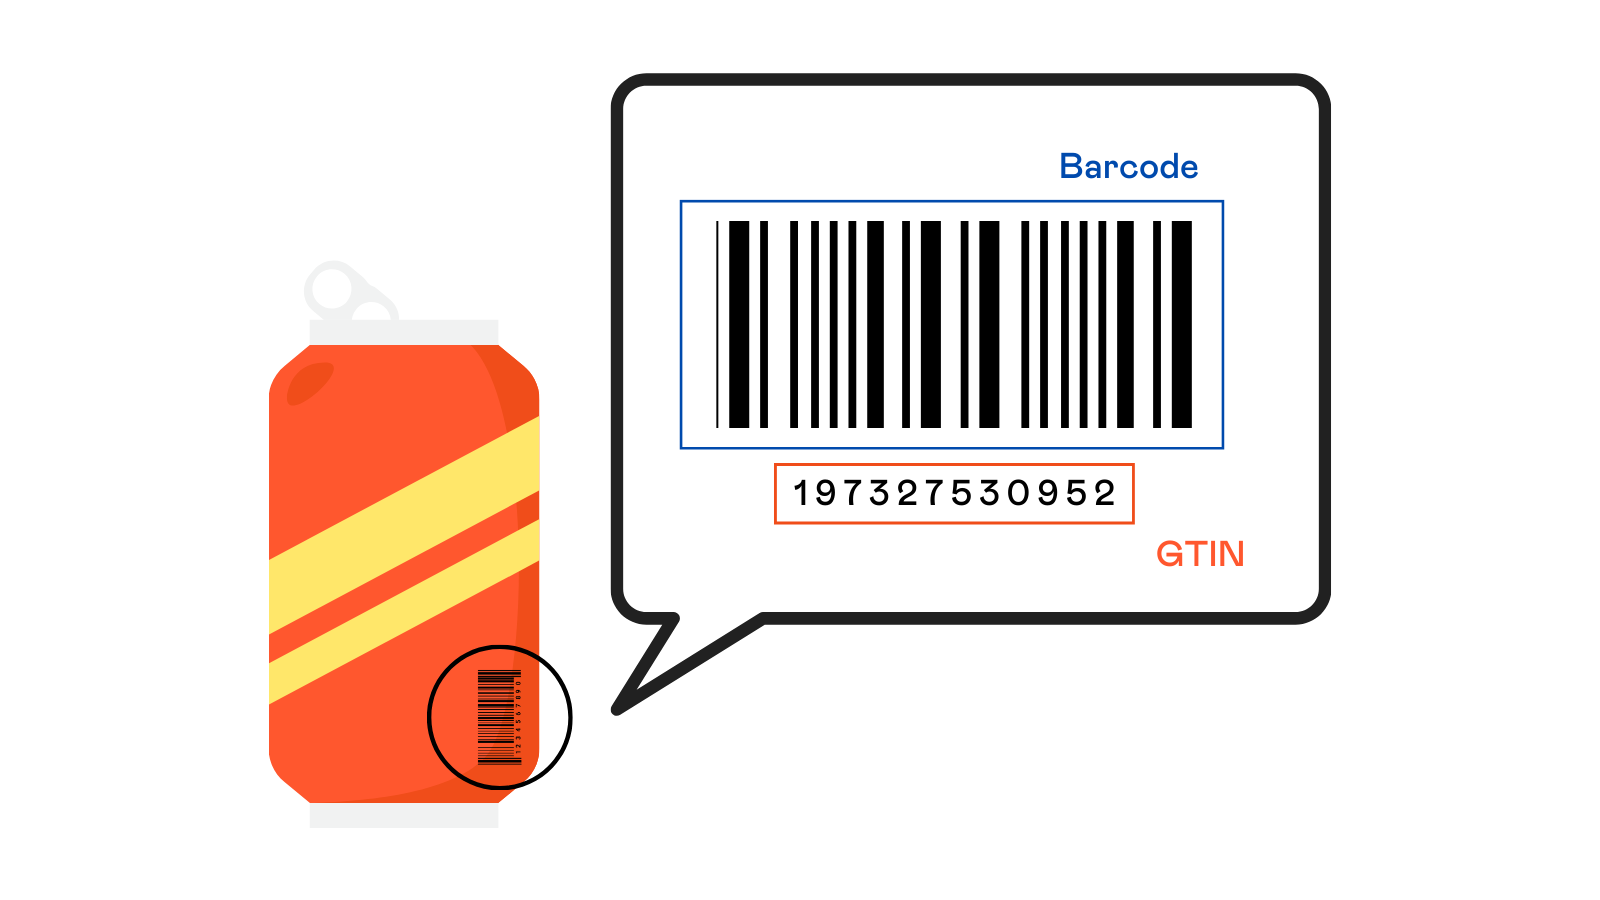 difference between a GTIN and Barcode